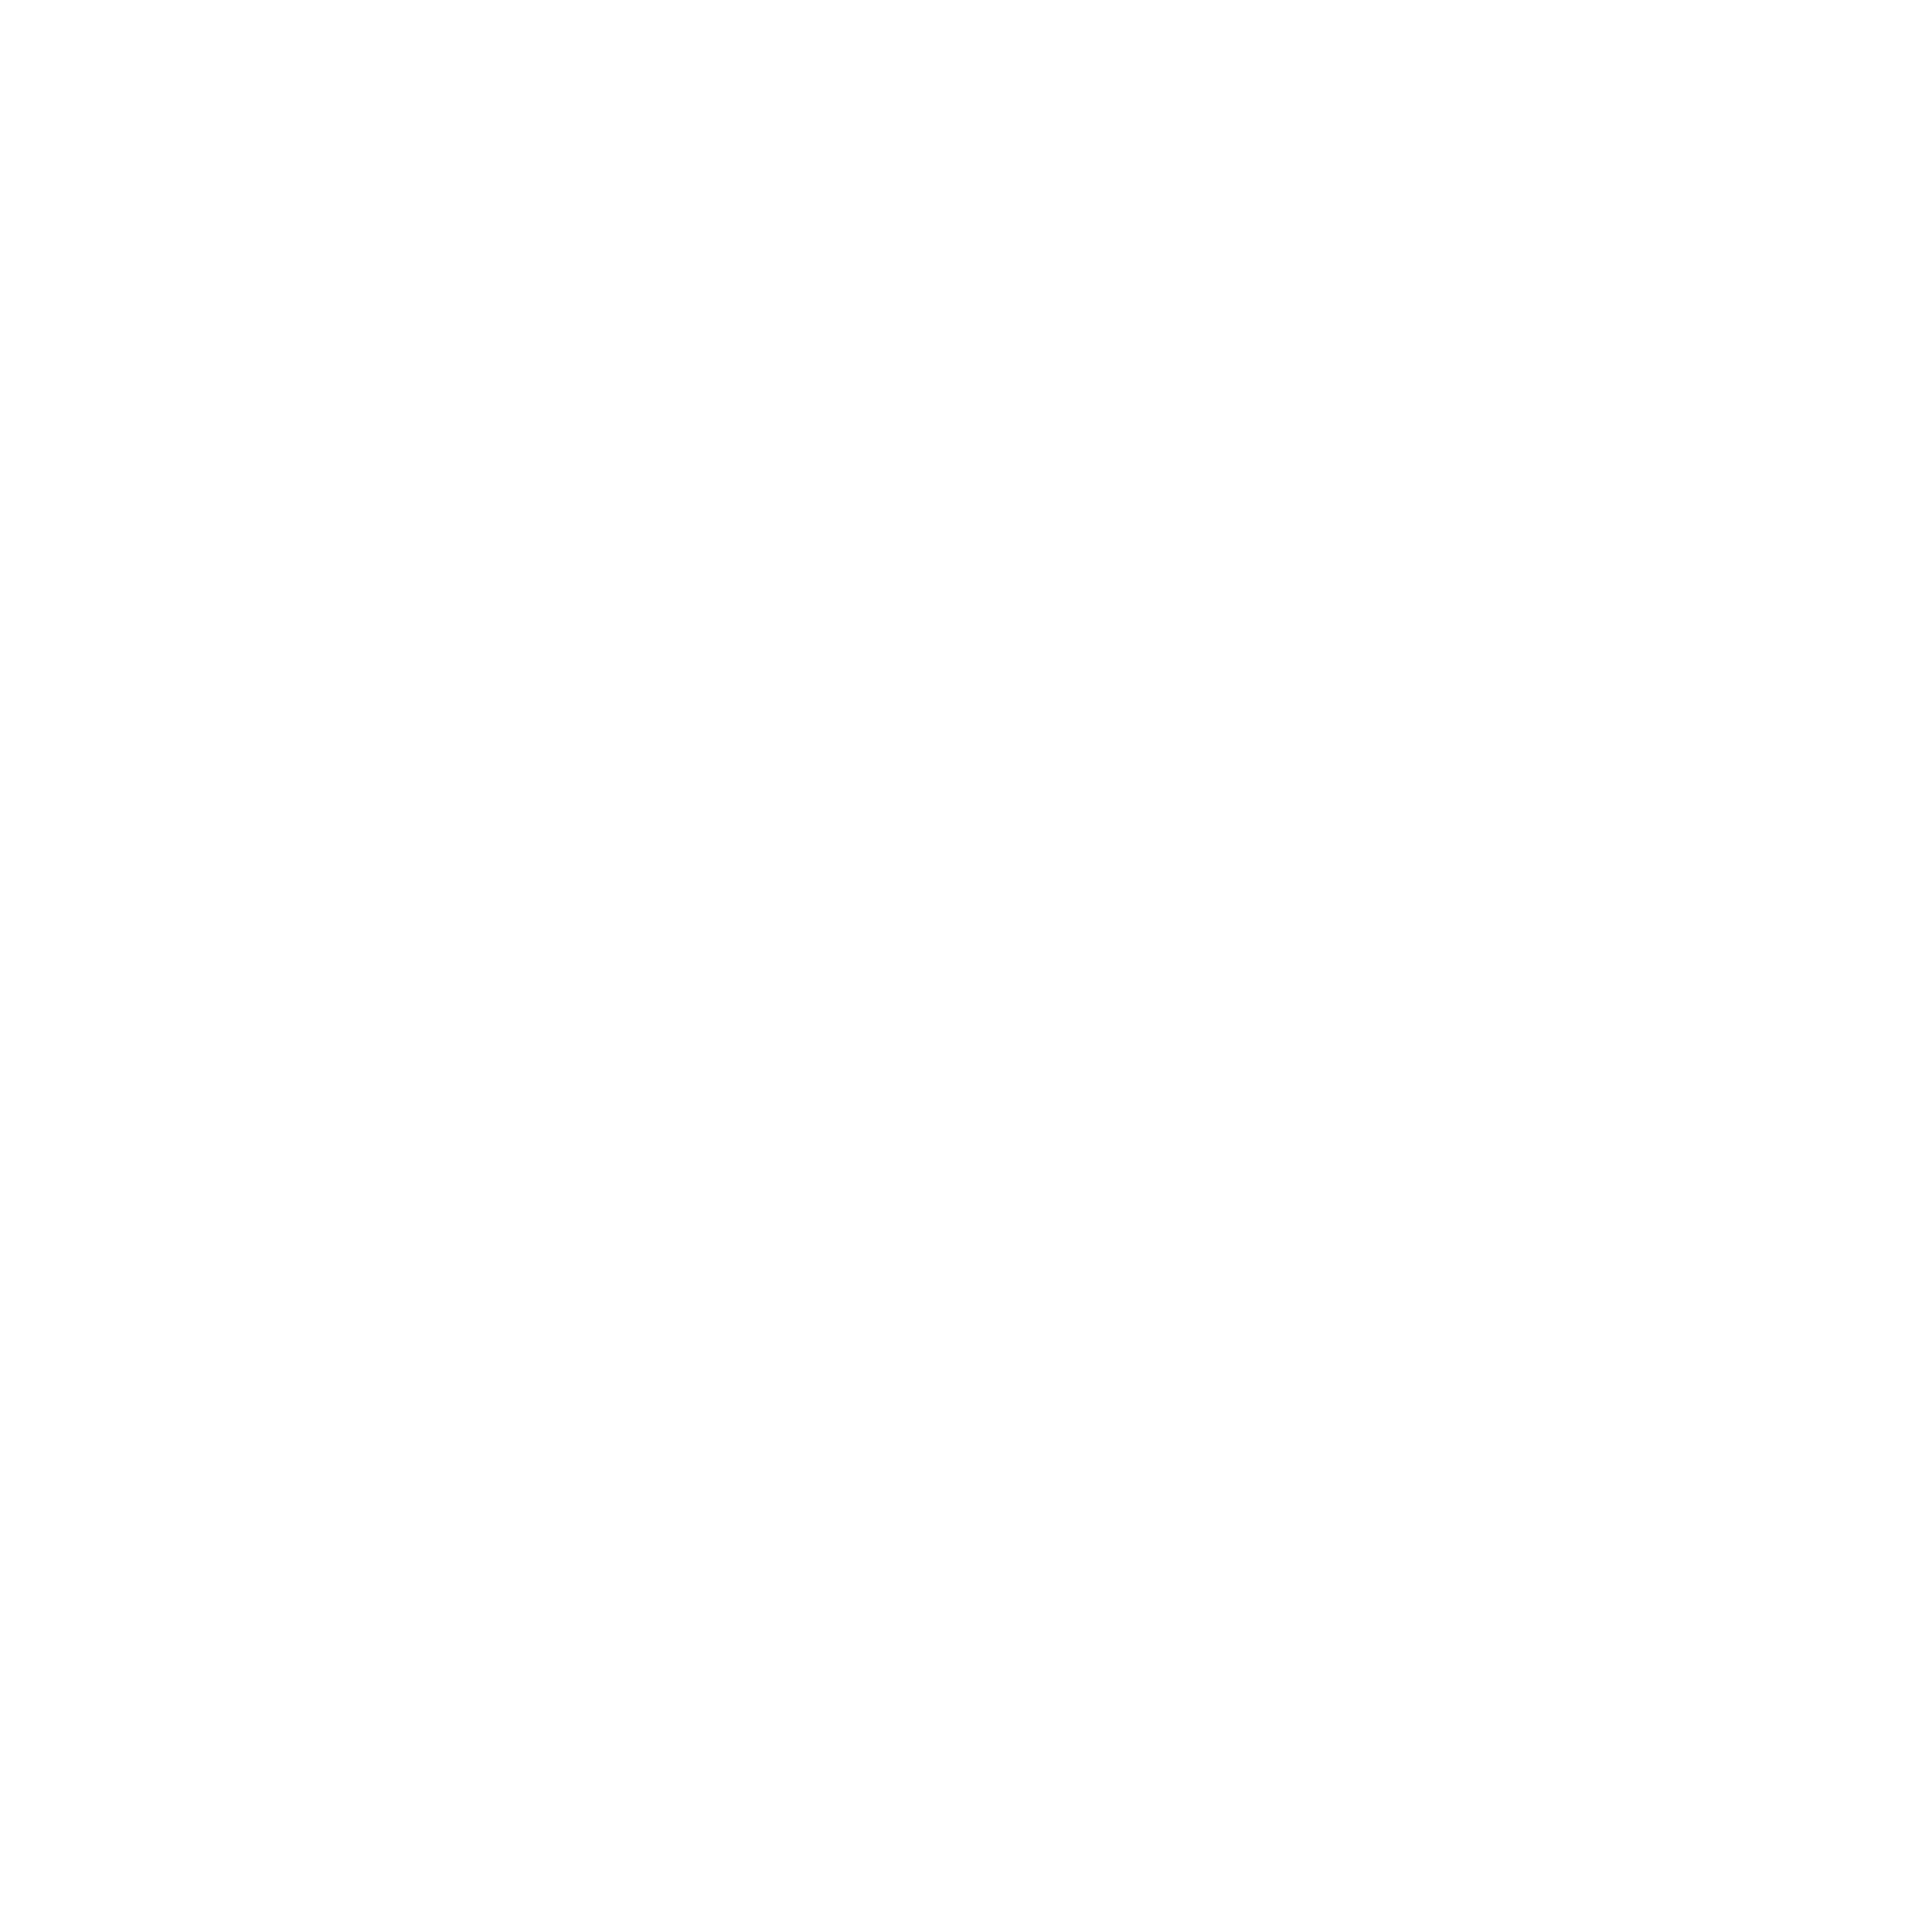 Simon Law Group - Justice Team